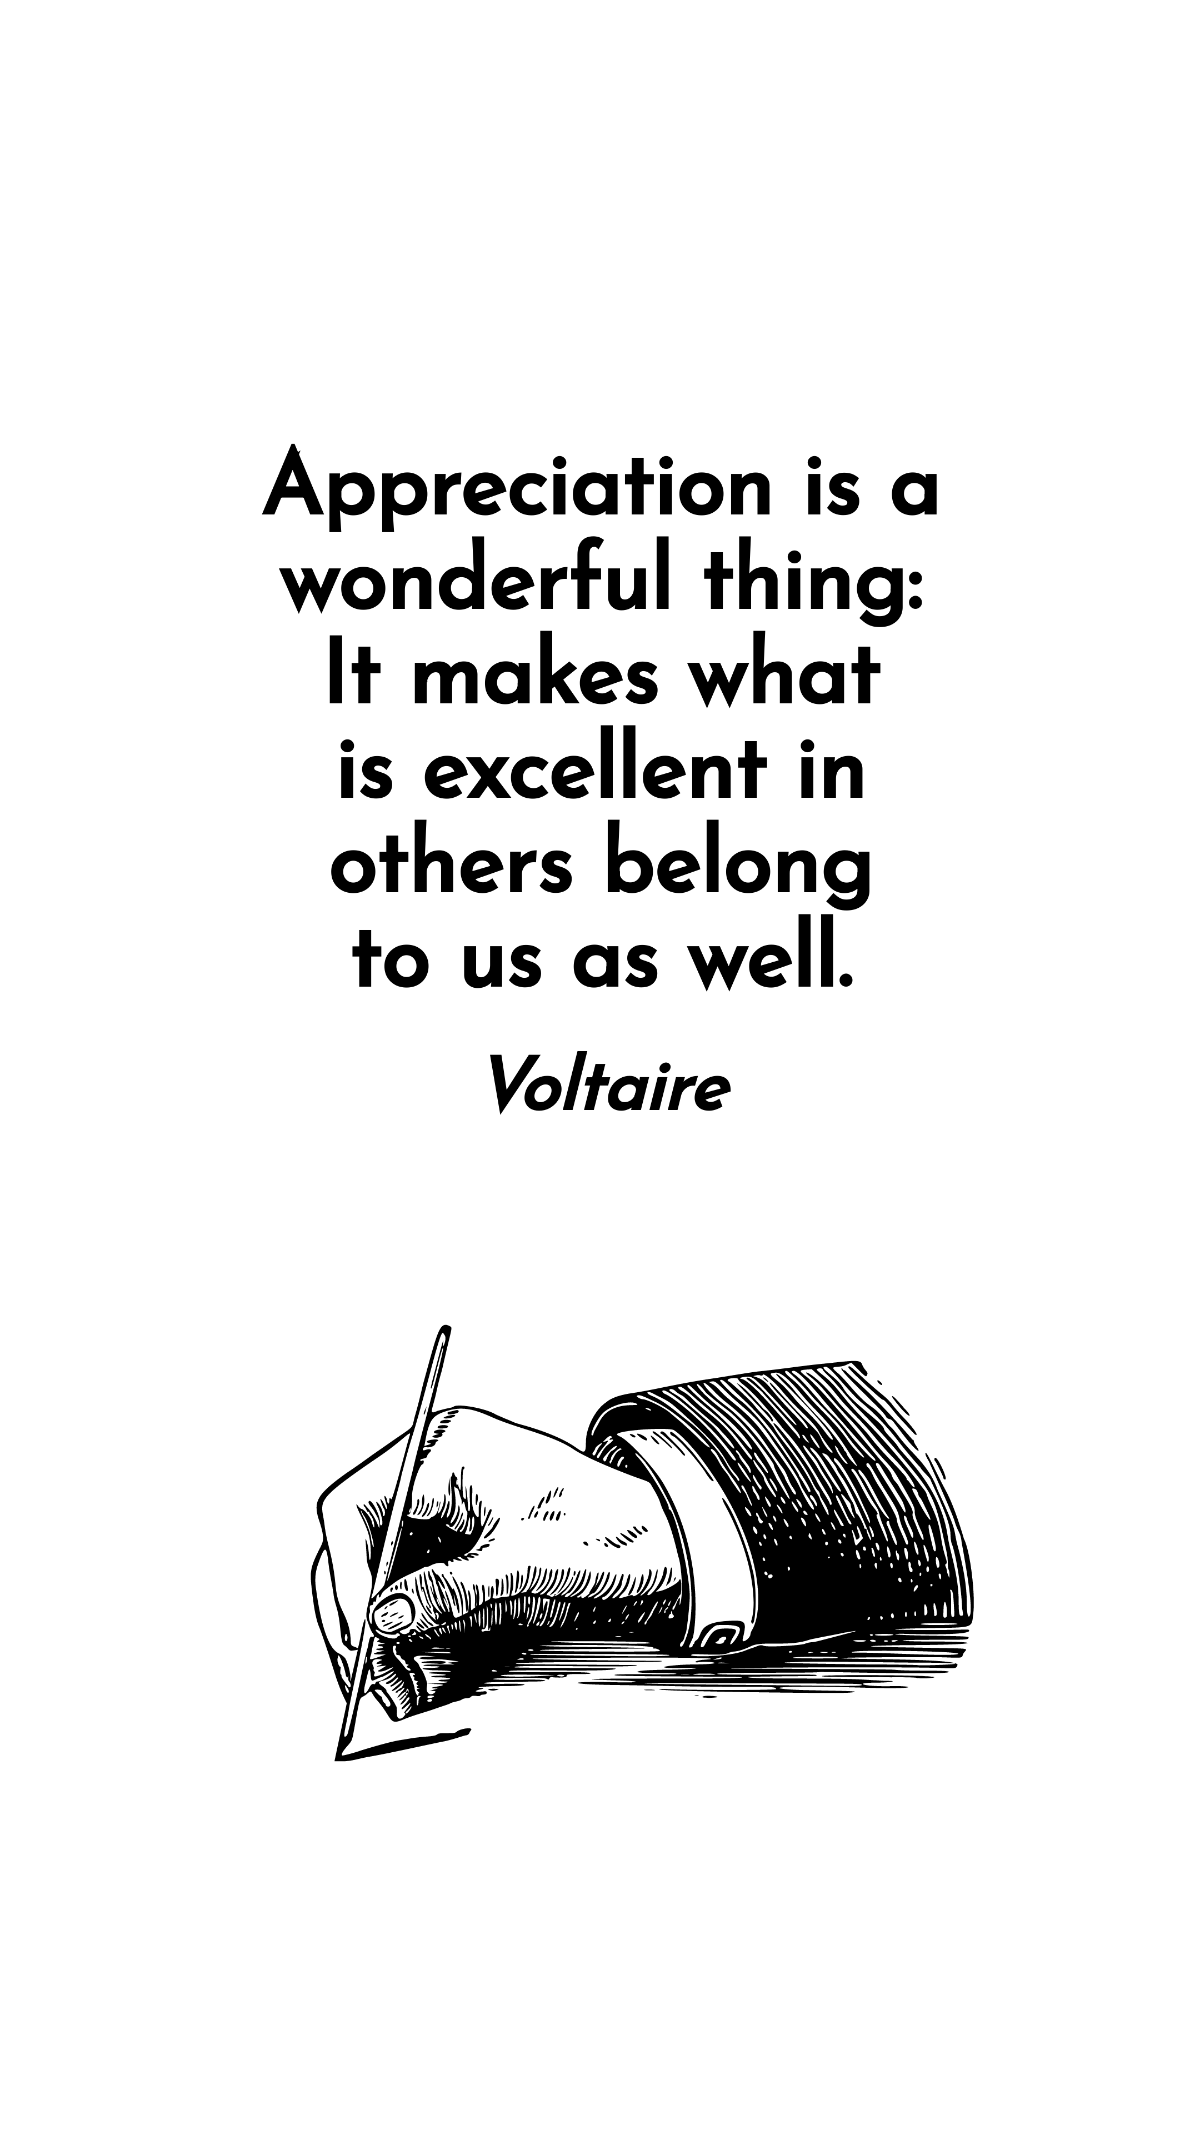 Voltaire - Appreciation is a wonderful thing: It makes what is excellent in others belong to us as well.